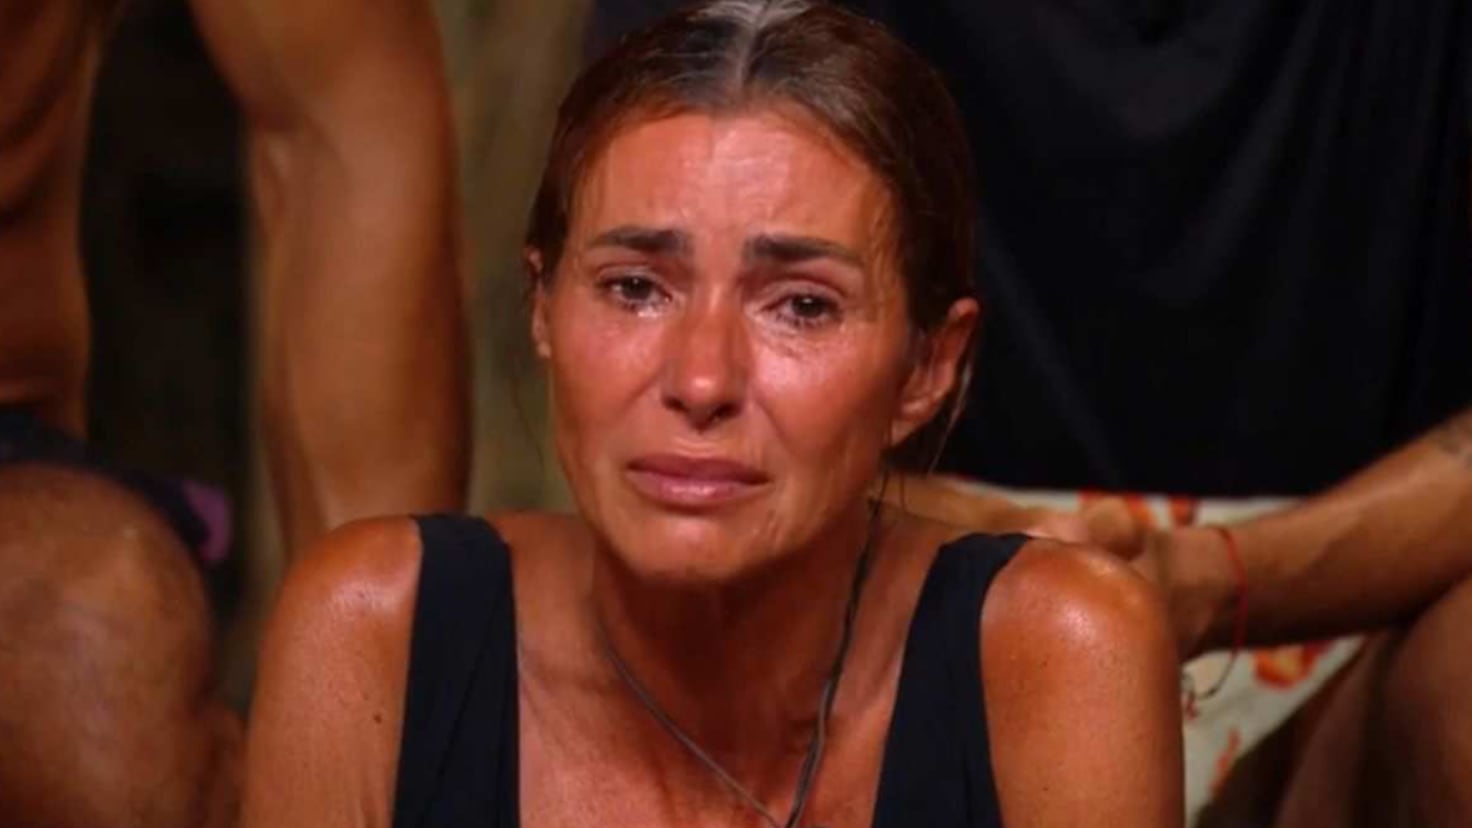 Arantxa del Sol, expelled from Mediaset after an incident with ngel Cristo Jr. in Supervivientes
